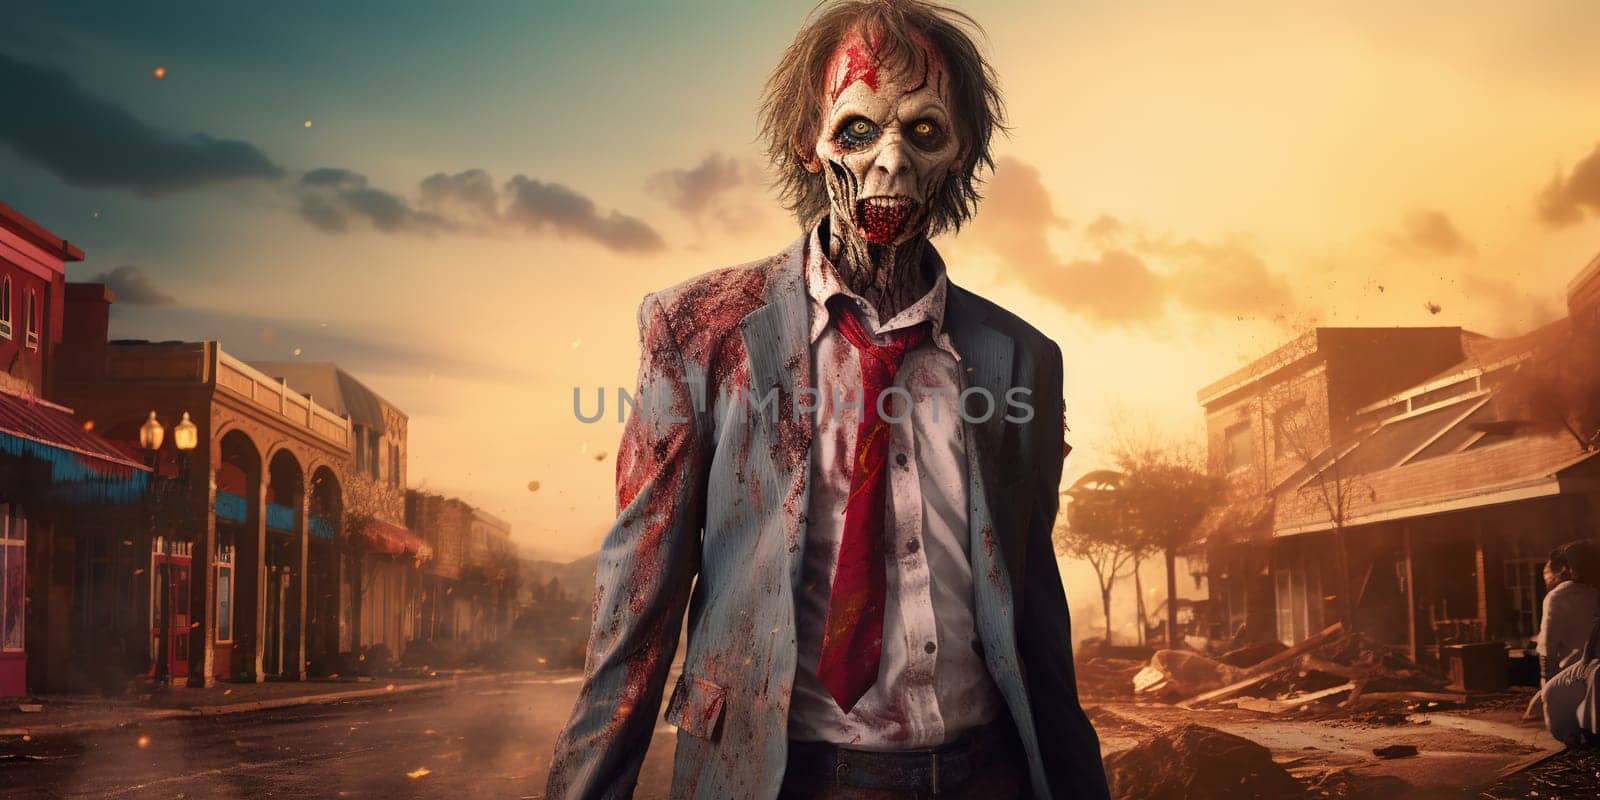 Creepy and spooky zombie in an apocalypse world